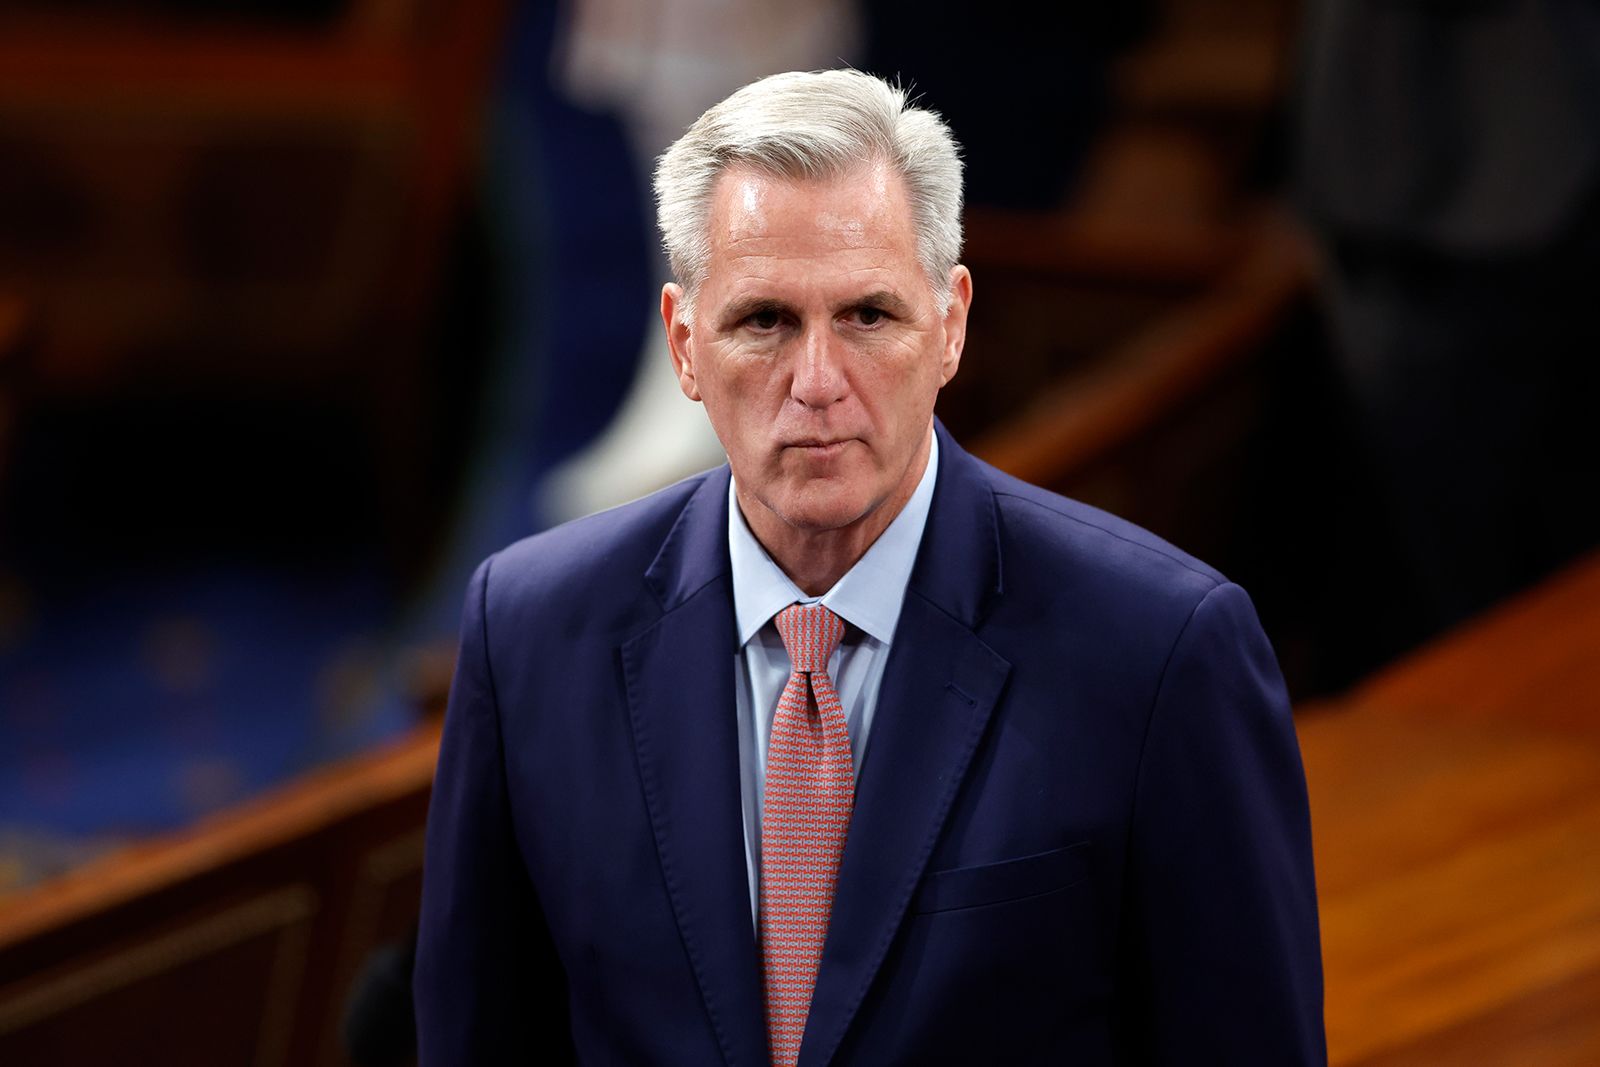 Kevin McCarthy: A Political Journey from California to the Speaker’s Chair